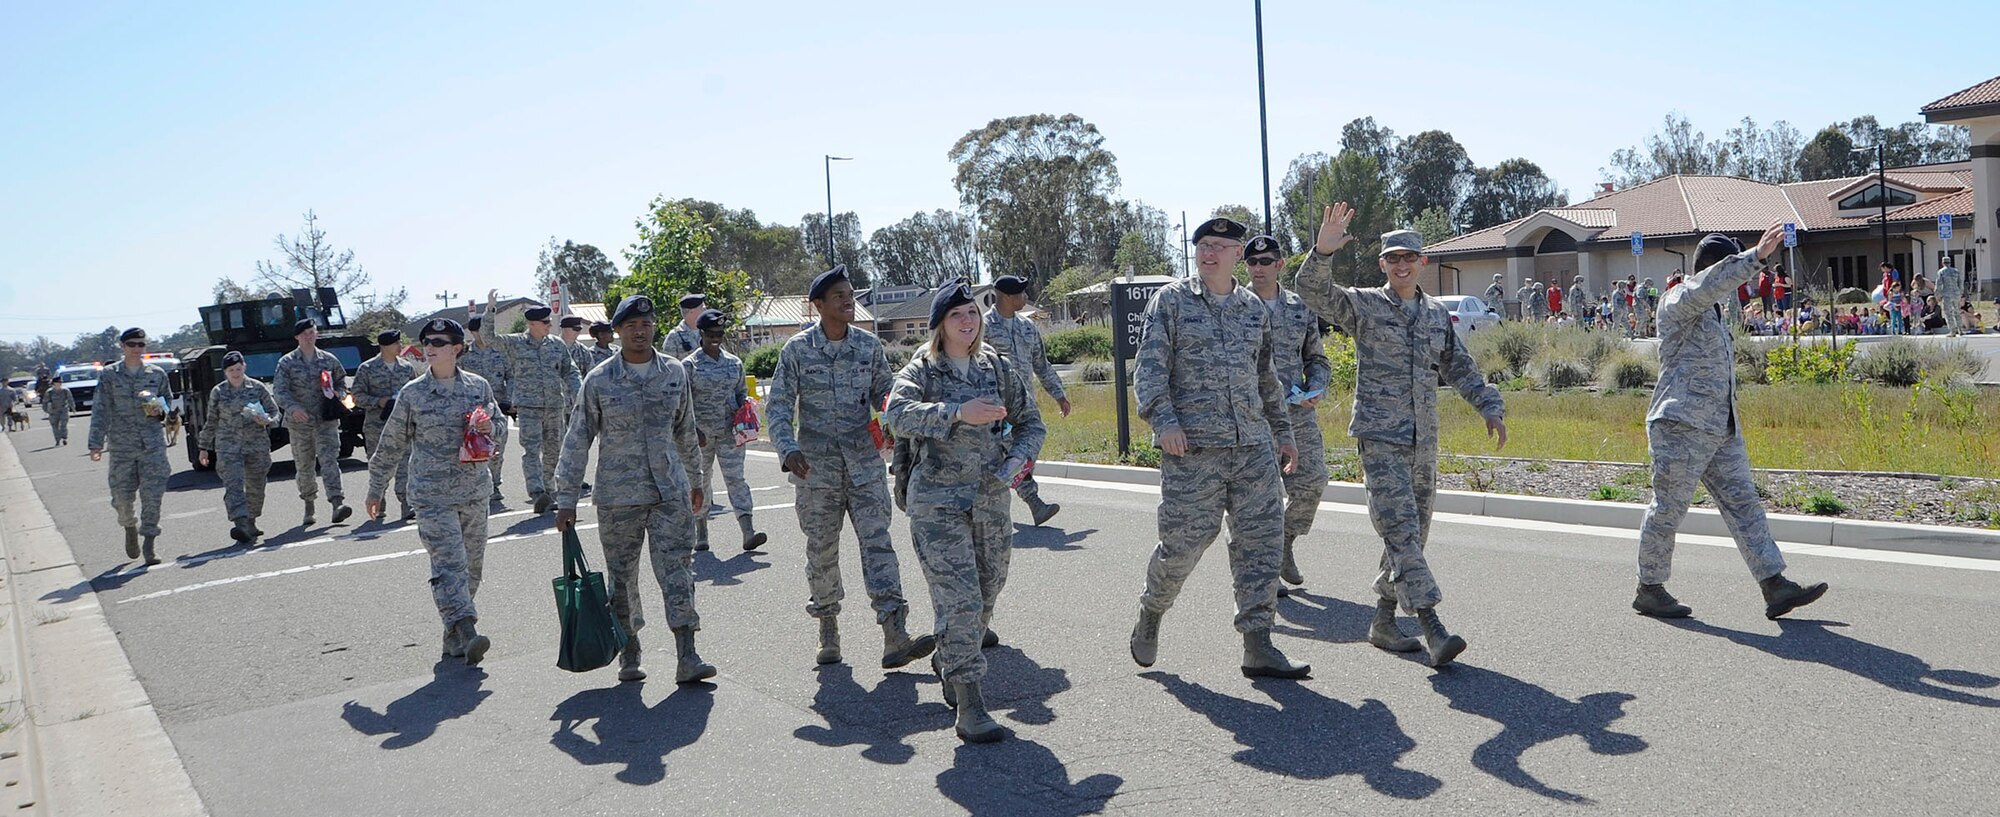 Members of the 30th Security Forces Squadron participated a parade on the afternoon of May 12 in honor of National Police Week. (U.S. Air Force photo by/Staff Sgt. Erica Picariello)